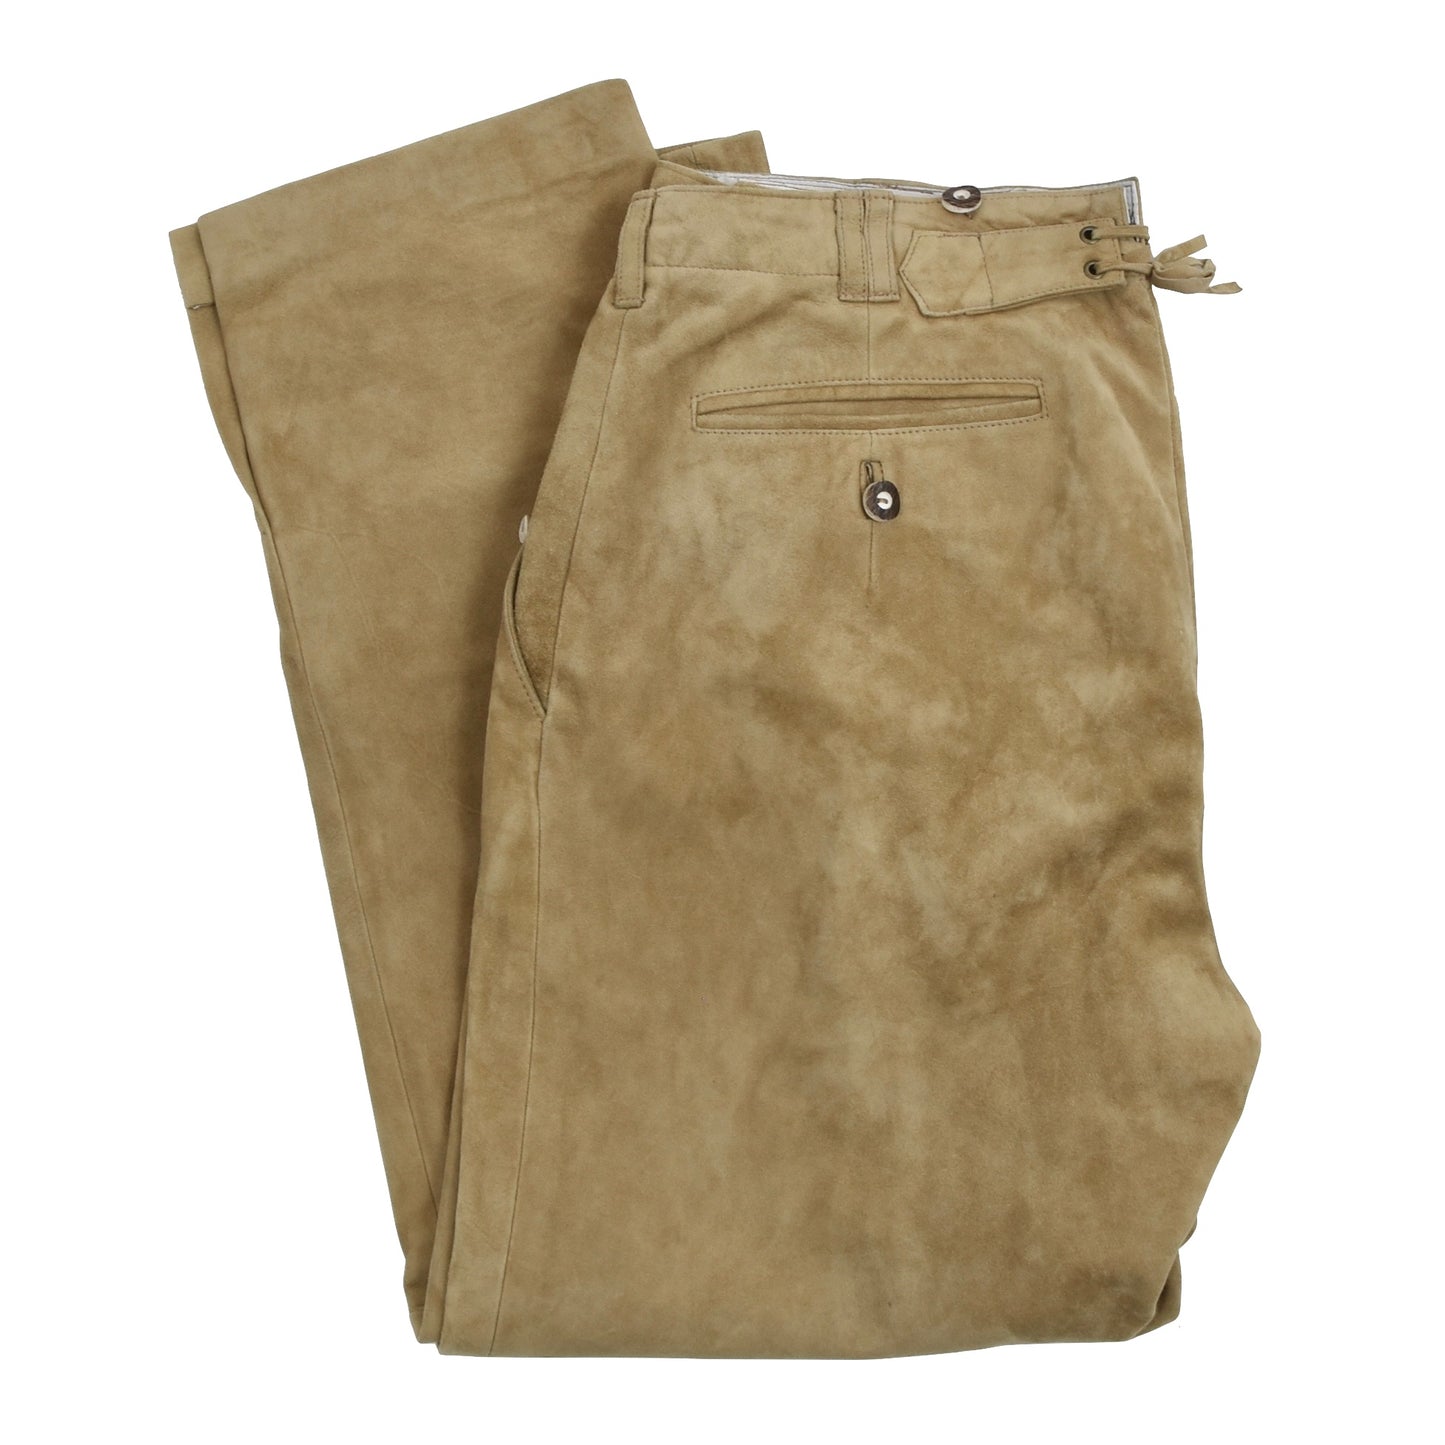 Steinbock Tyrol Suede Leather Pants Size 50 - Tan